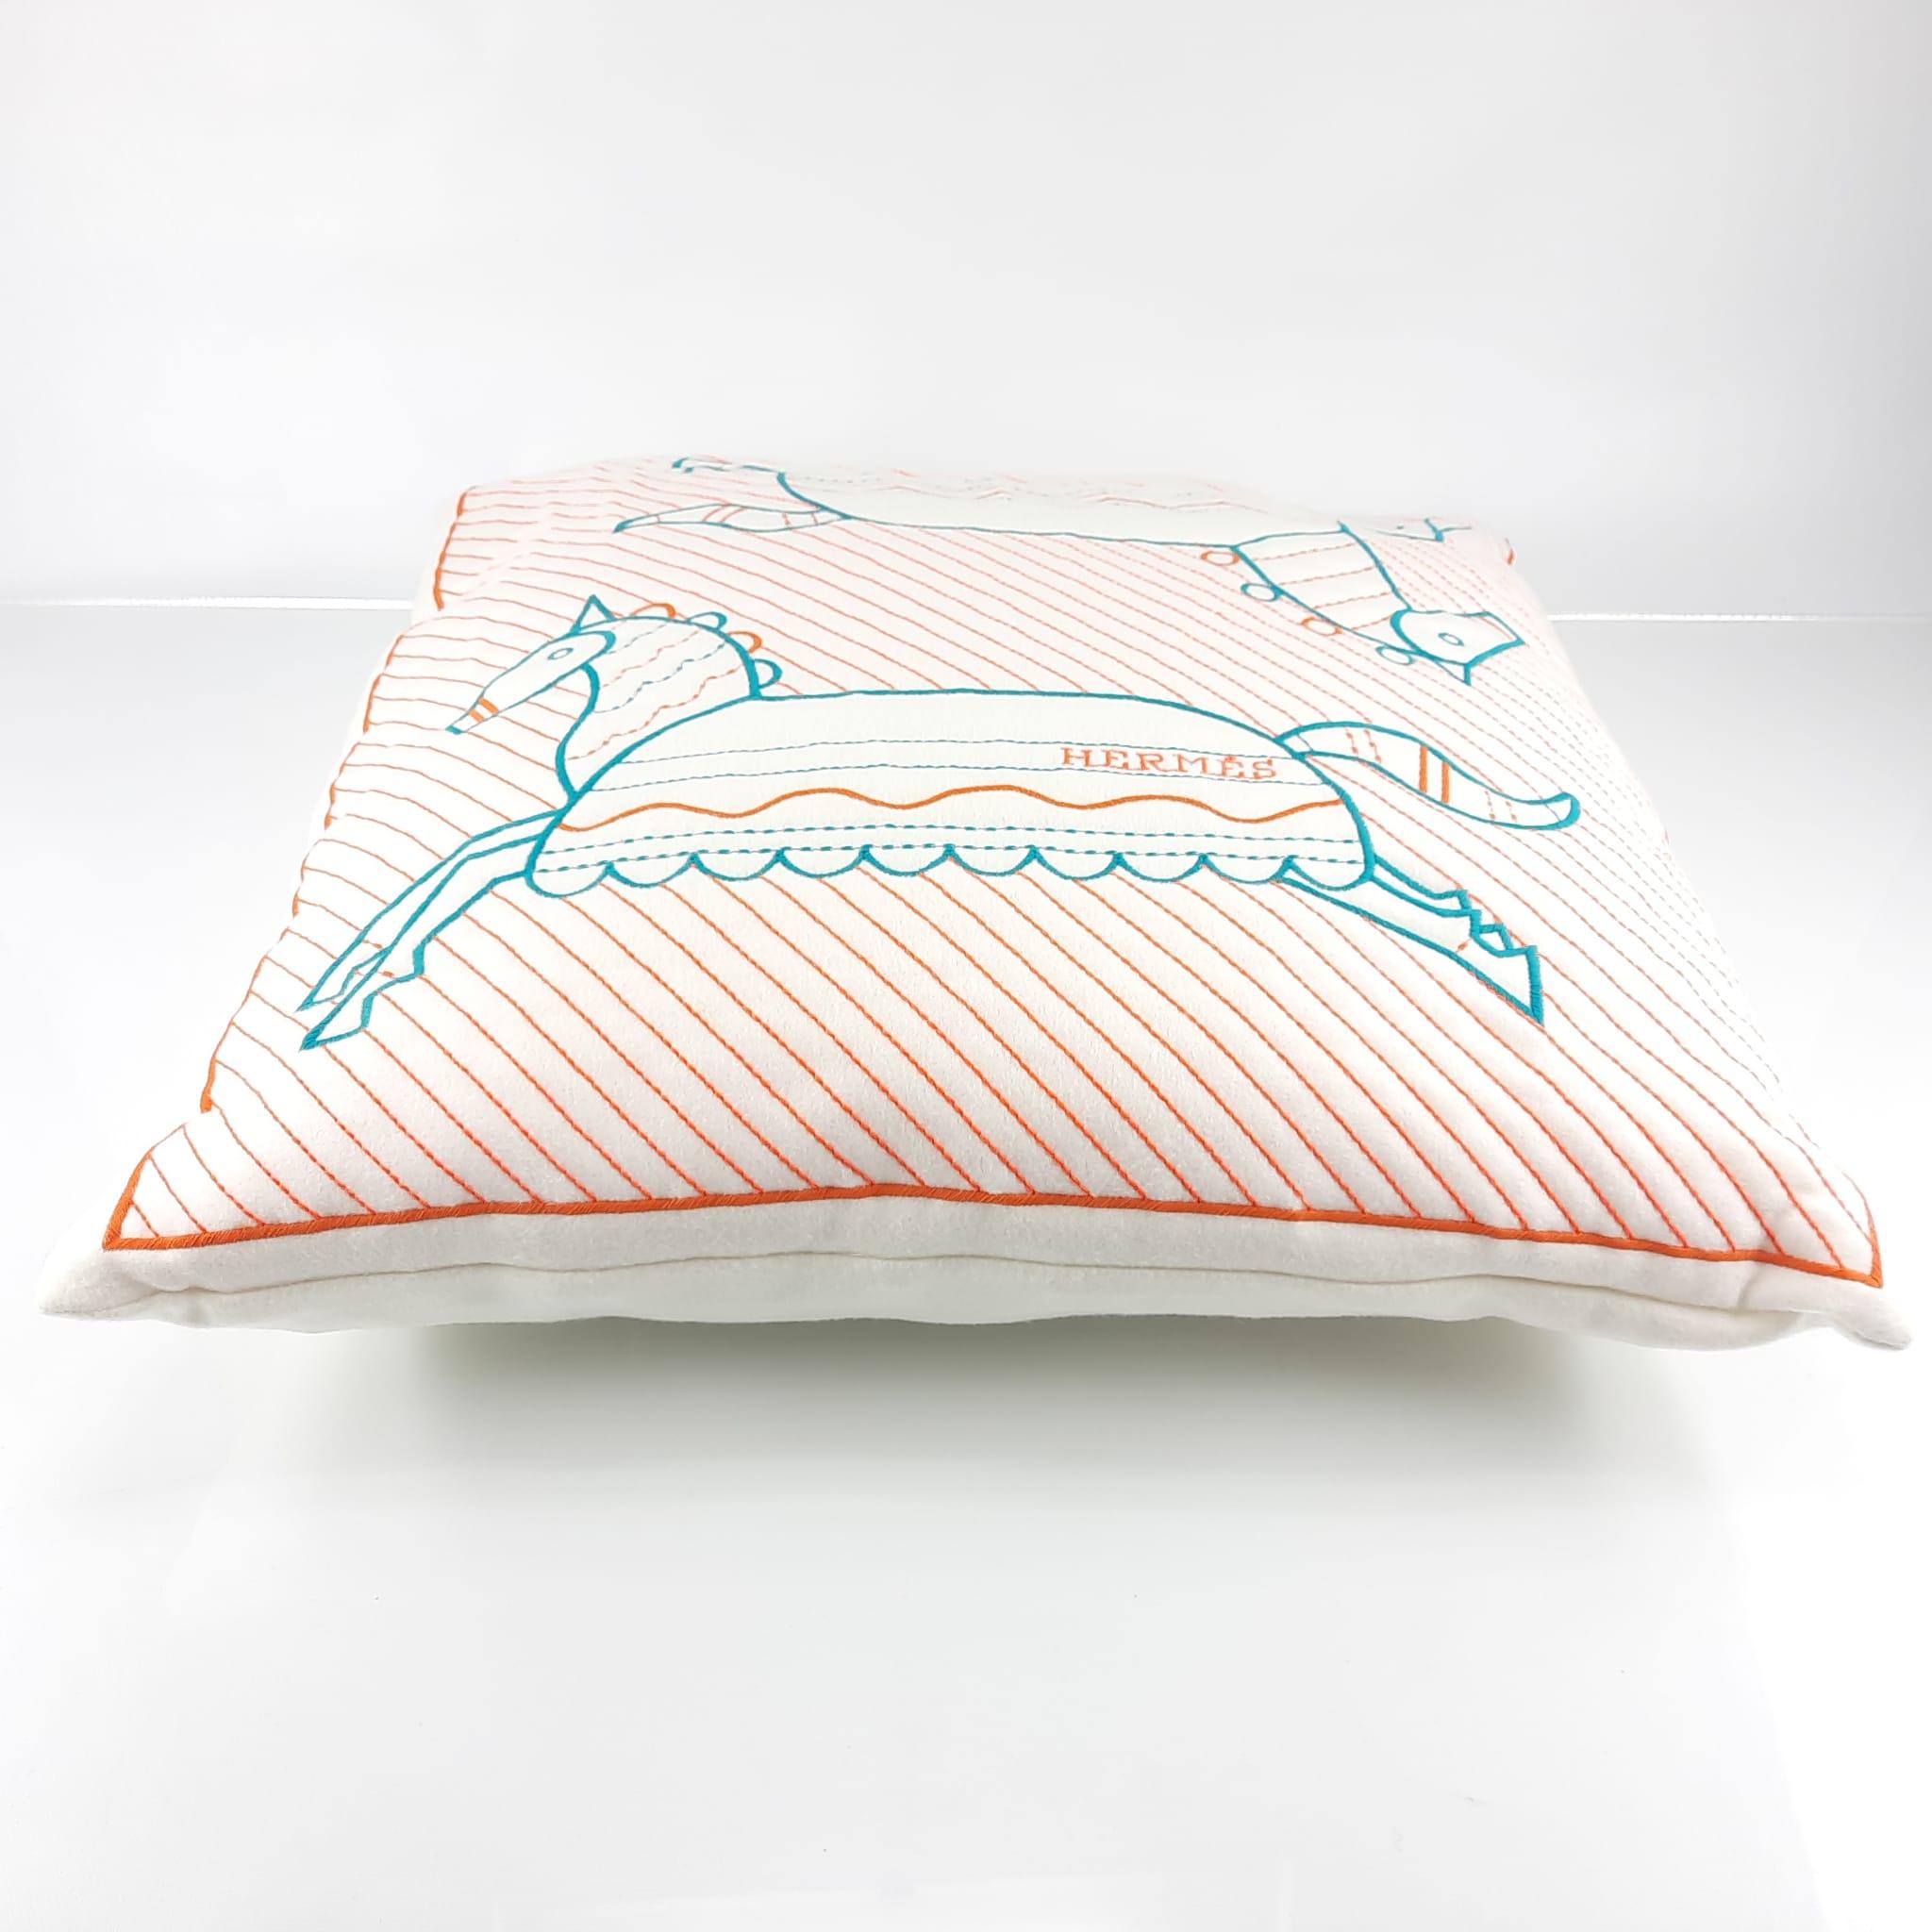 Color Blanc Crème
Quilted pillow with removable cover in jacquard woven wool and cashmere
Machine embroidered with quilting technique
Designed by Jan Bajtlik